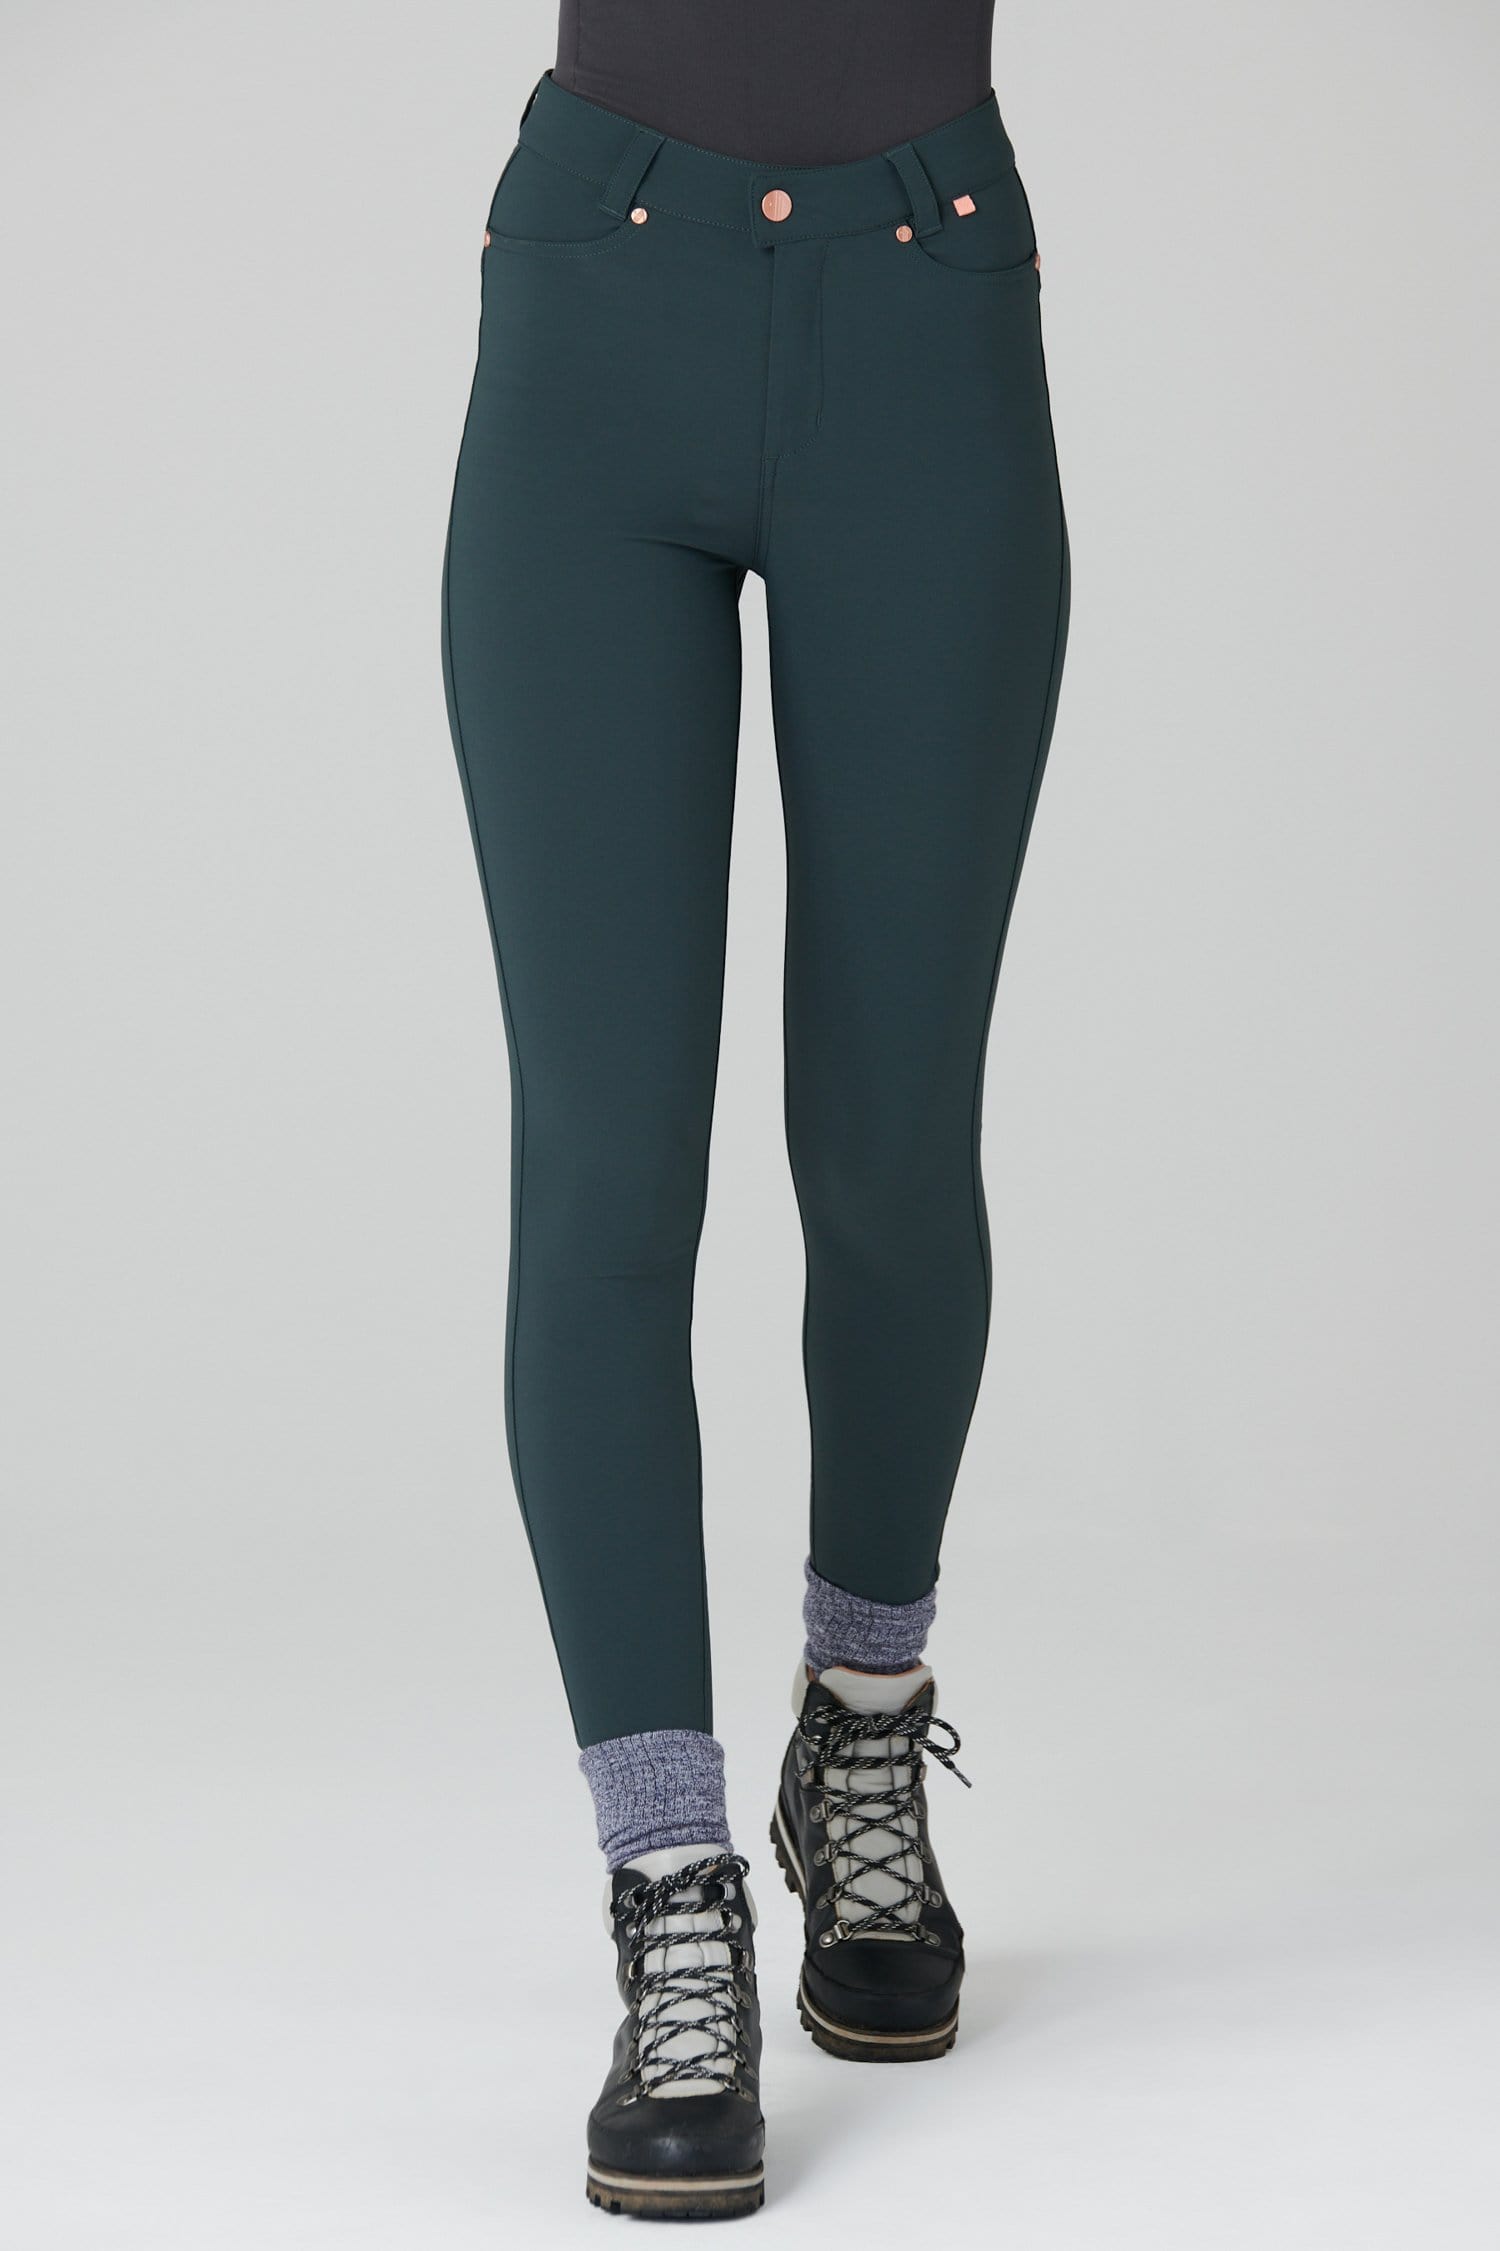 Max Stretch Skinny Outdoor Trousers - Forest Green - 28r / Uk10 - Womens - Acai Outdoorwear